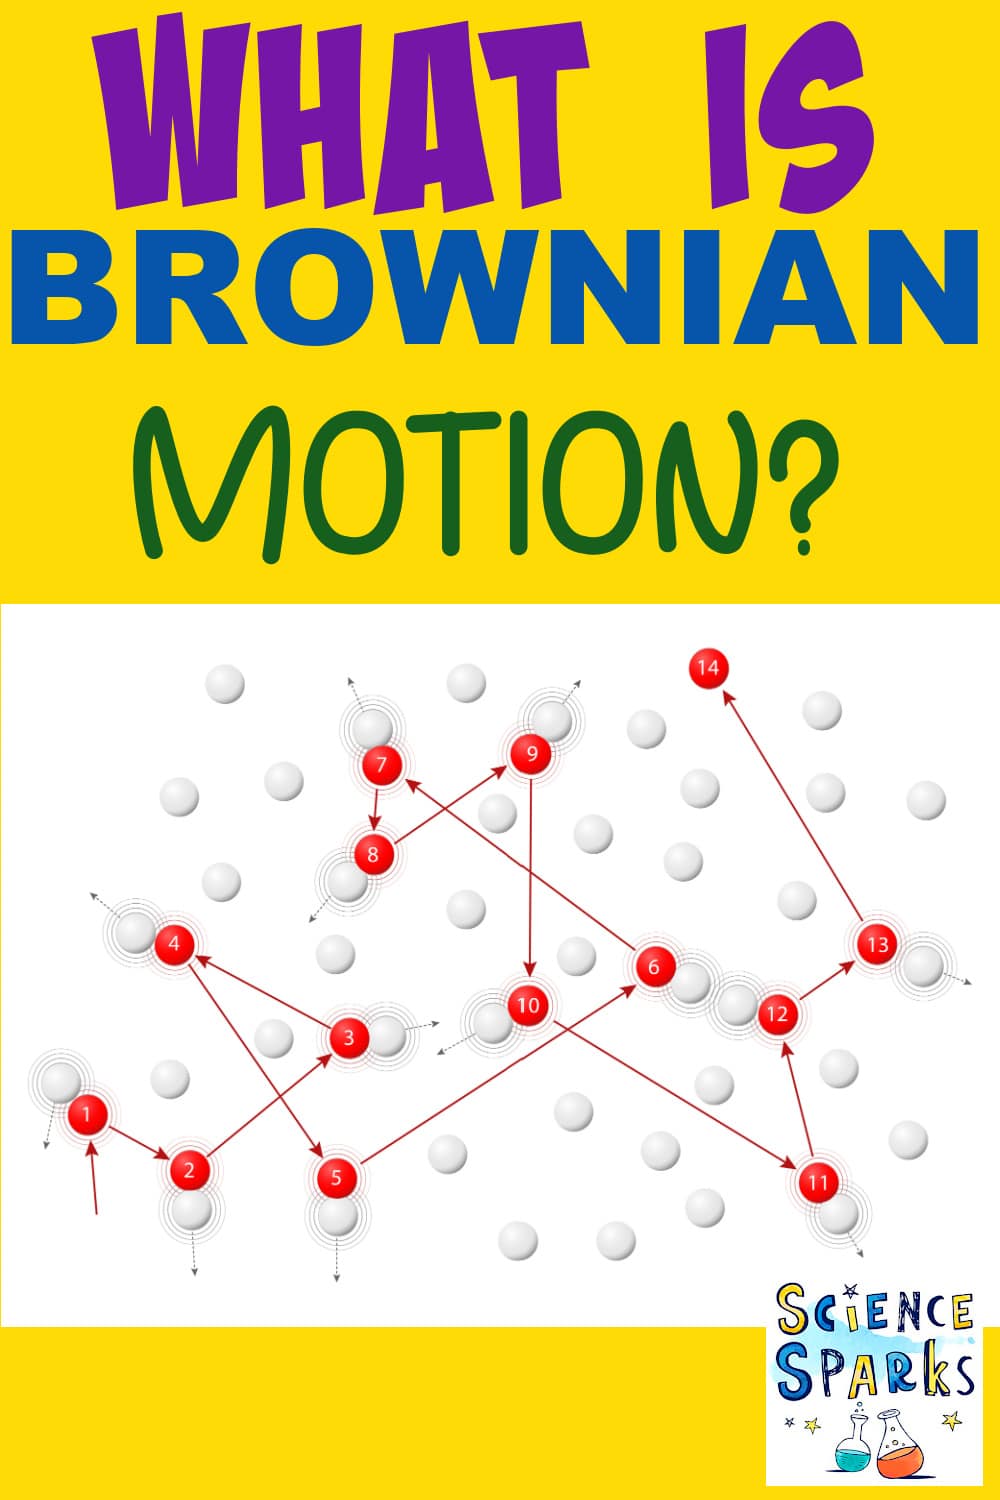 particles colliding due to Brownian Motion